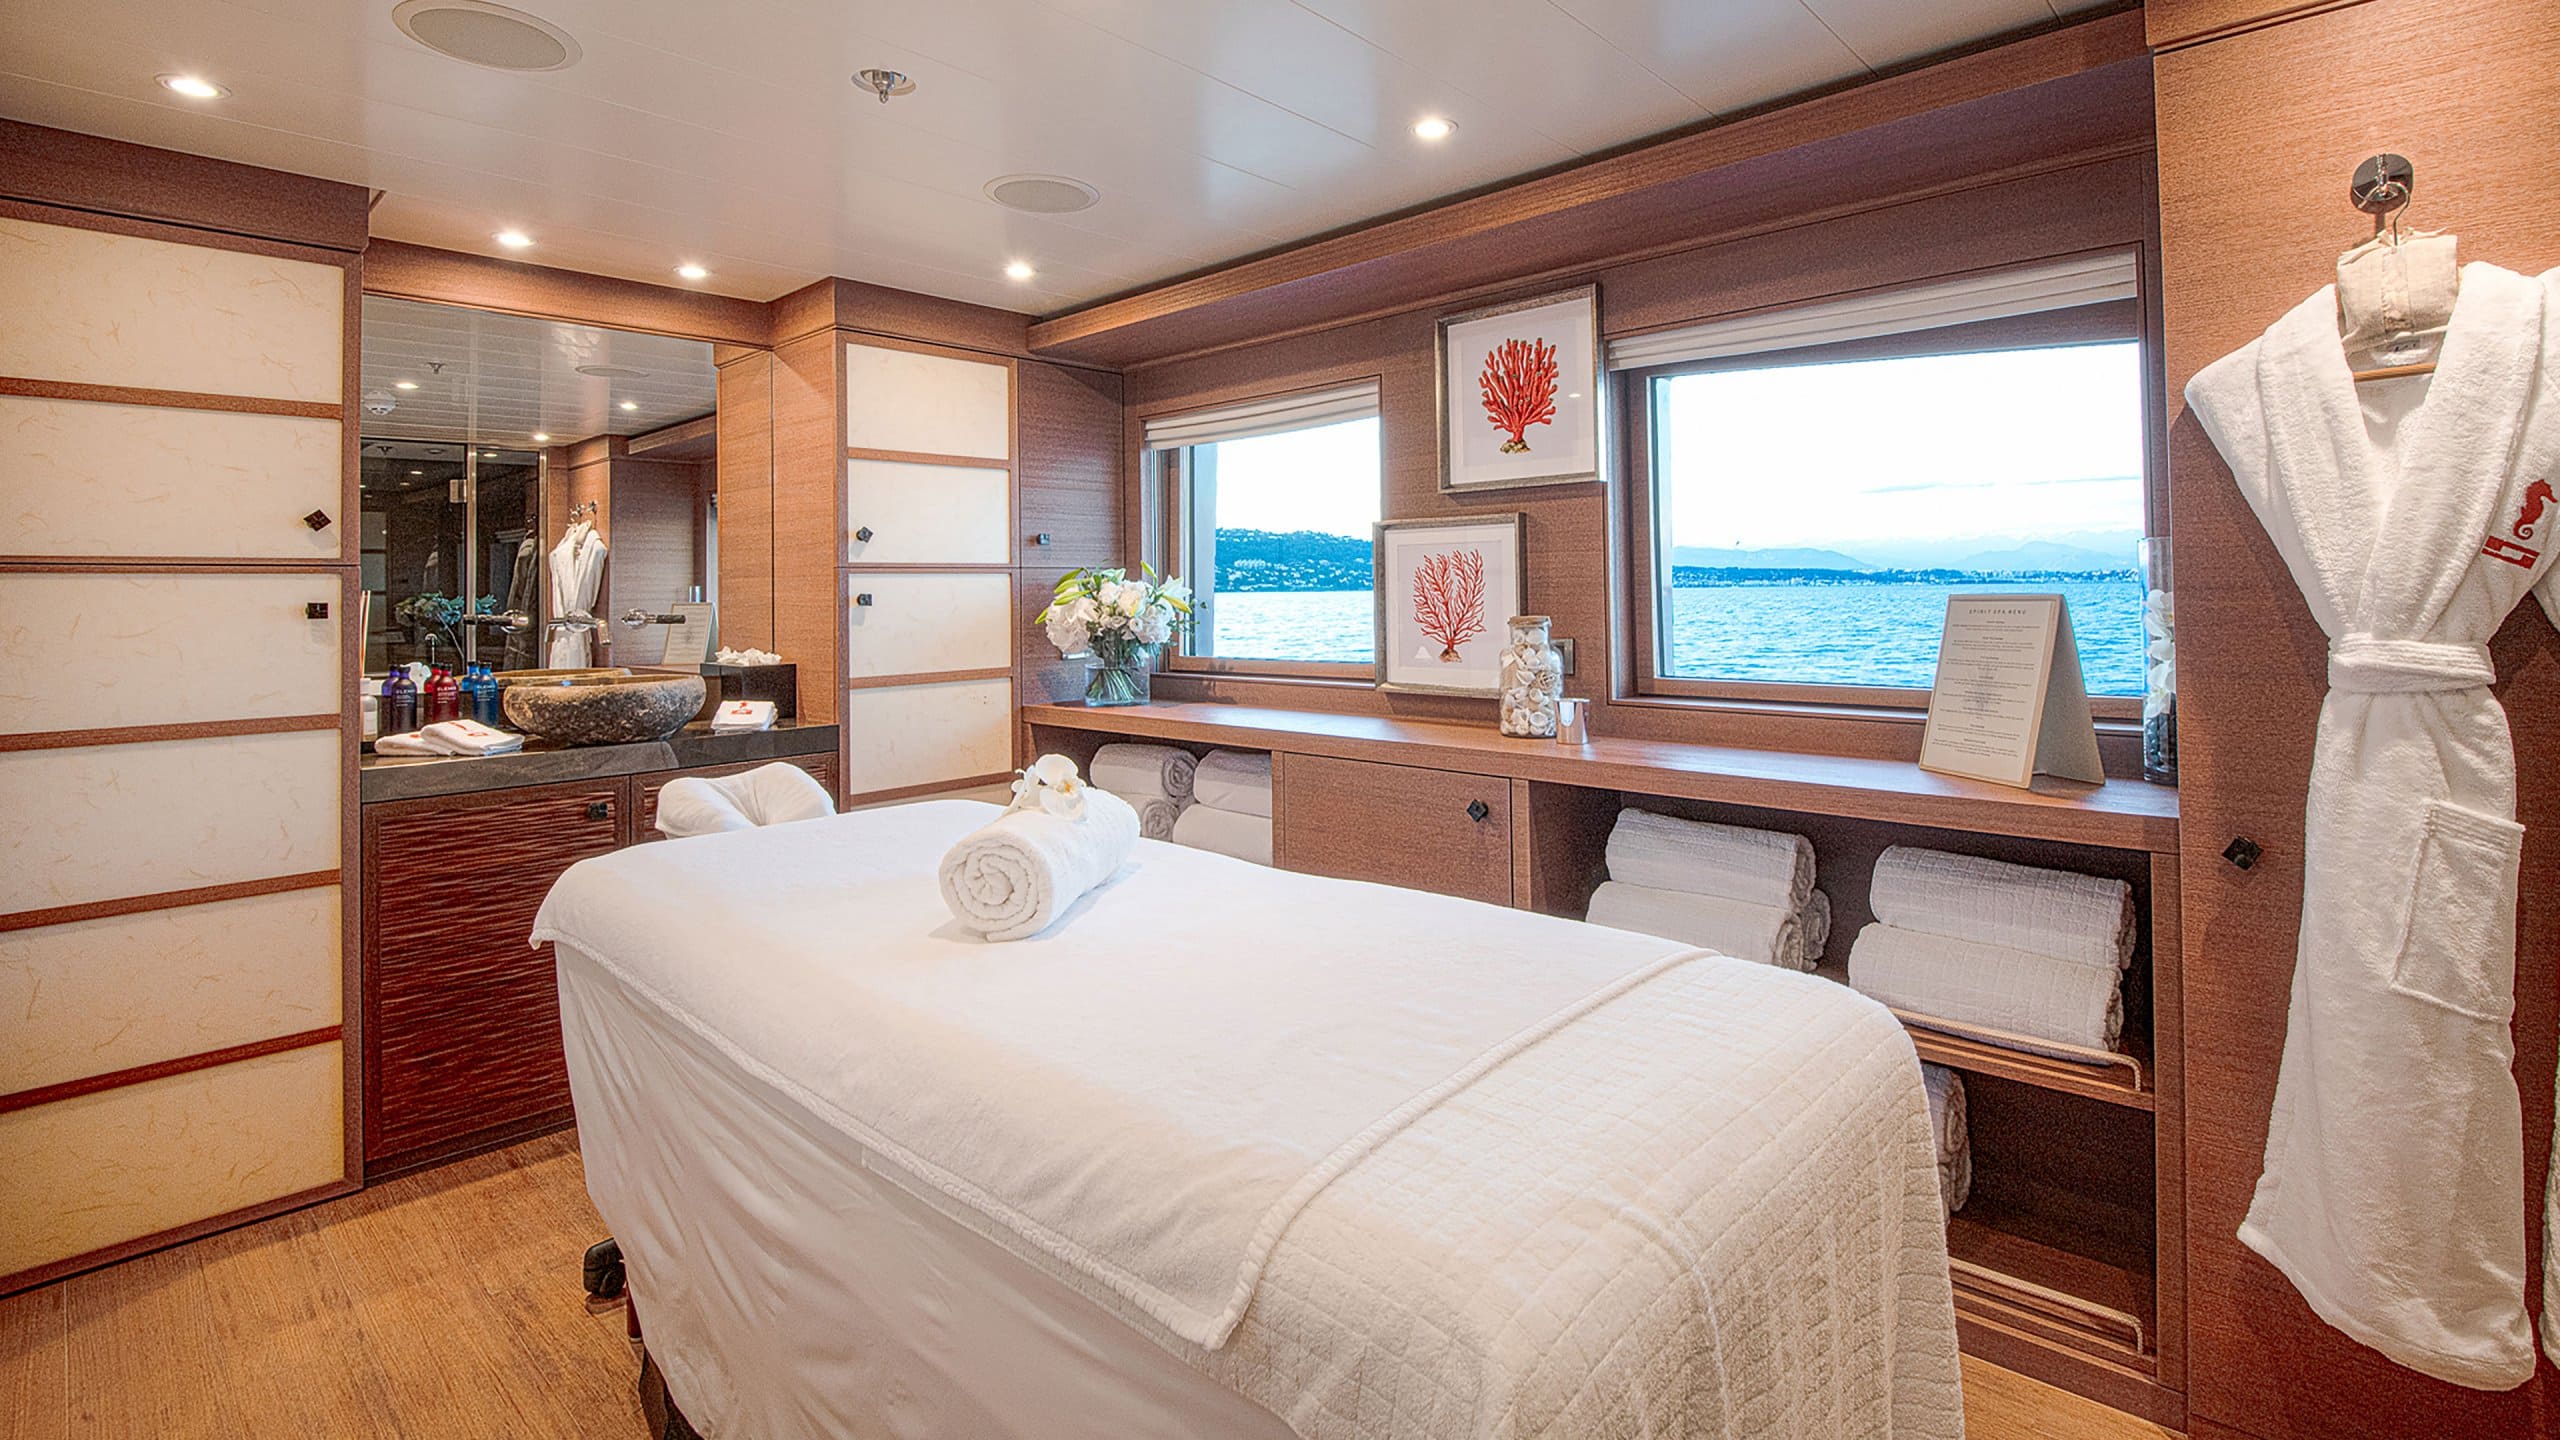 spirit yacht charter massage room, VIP for charter guests